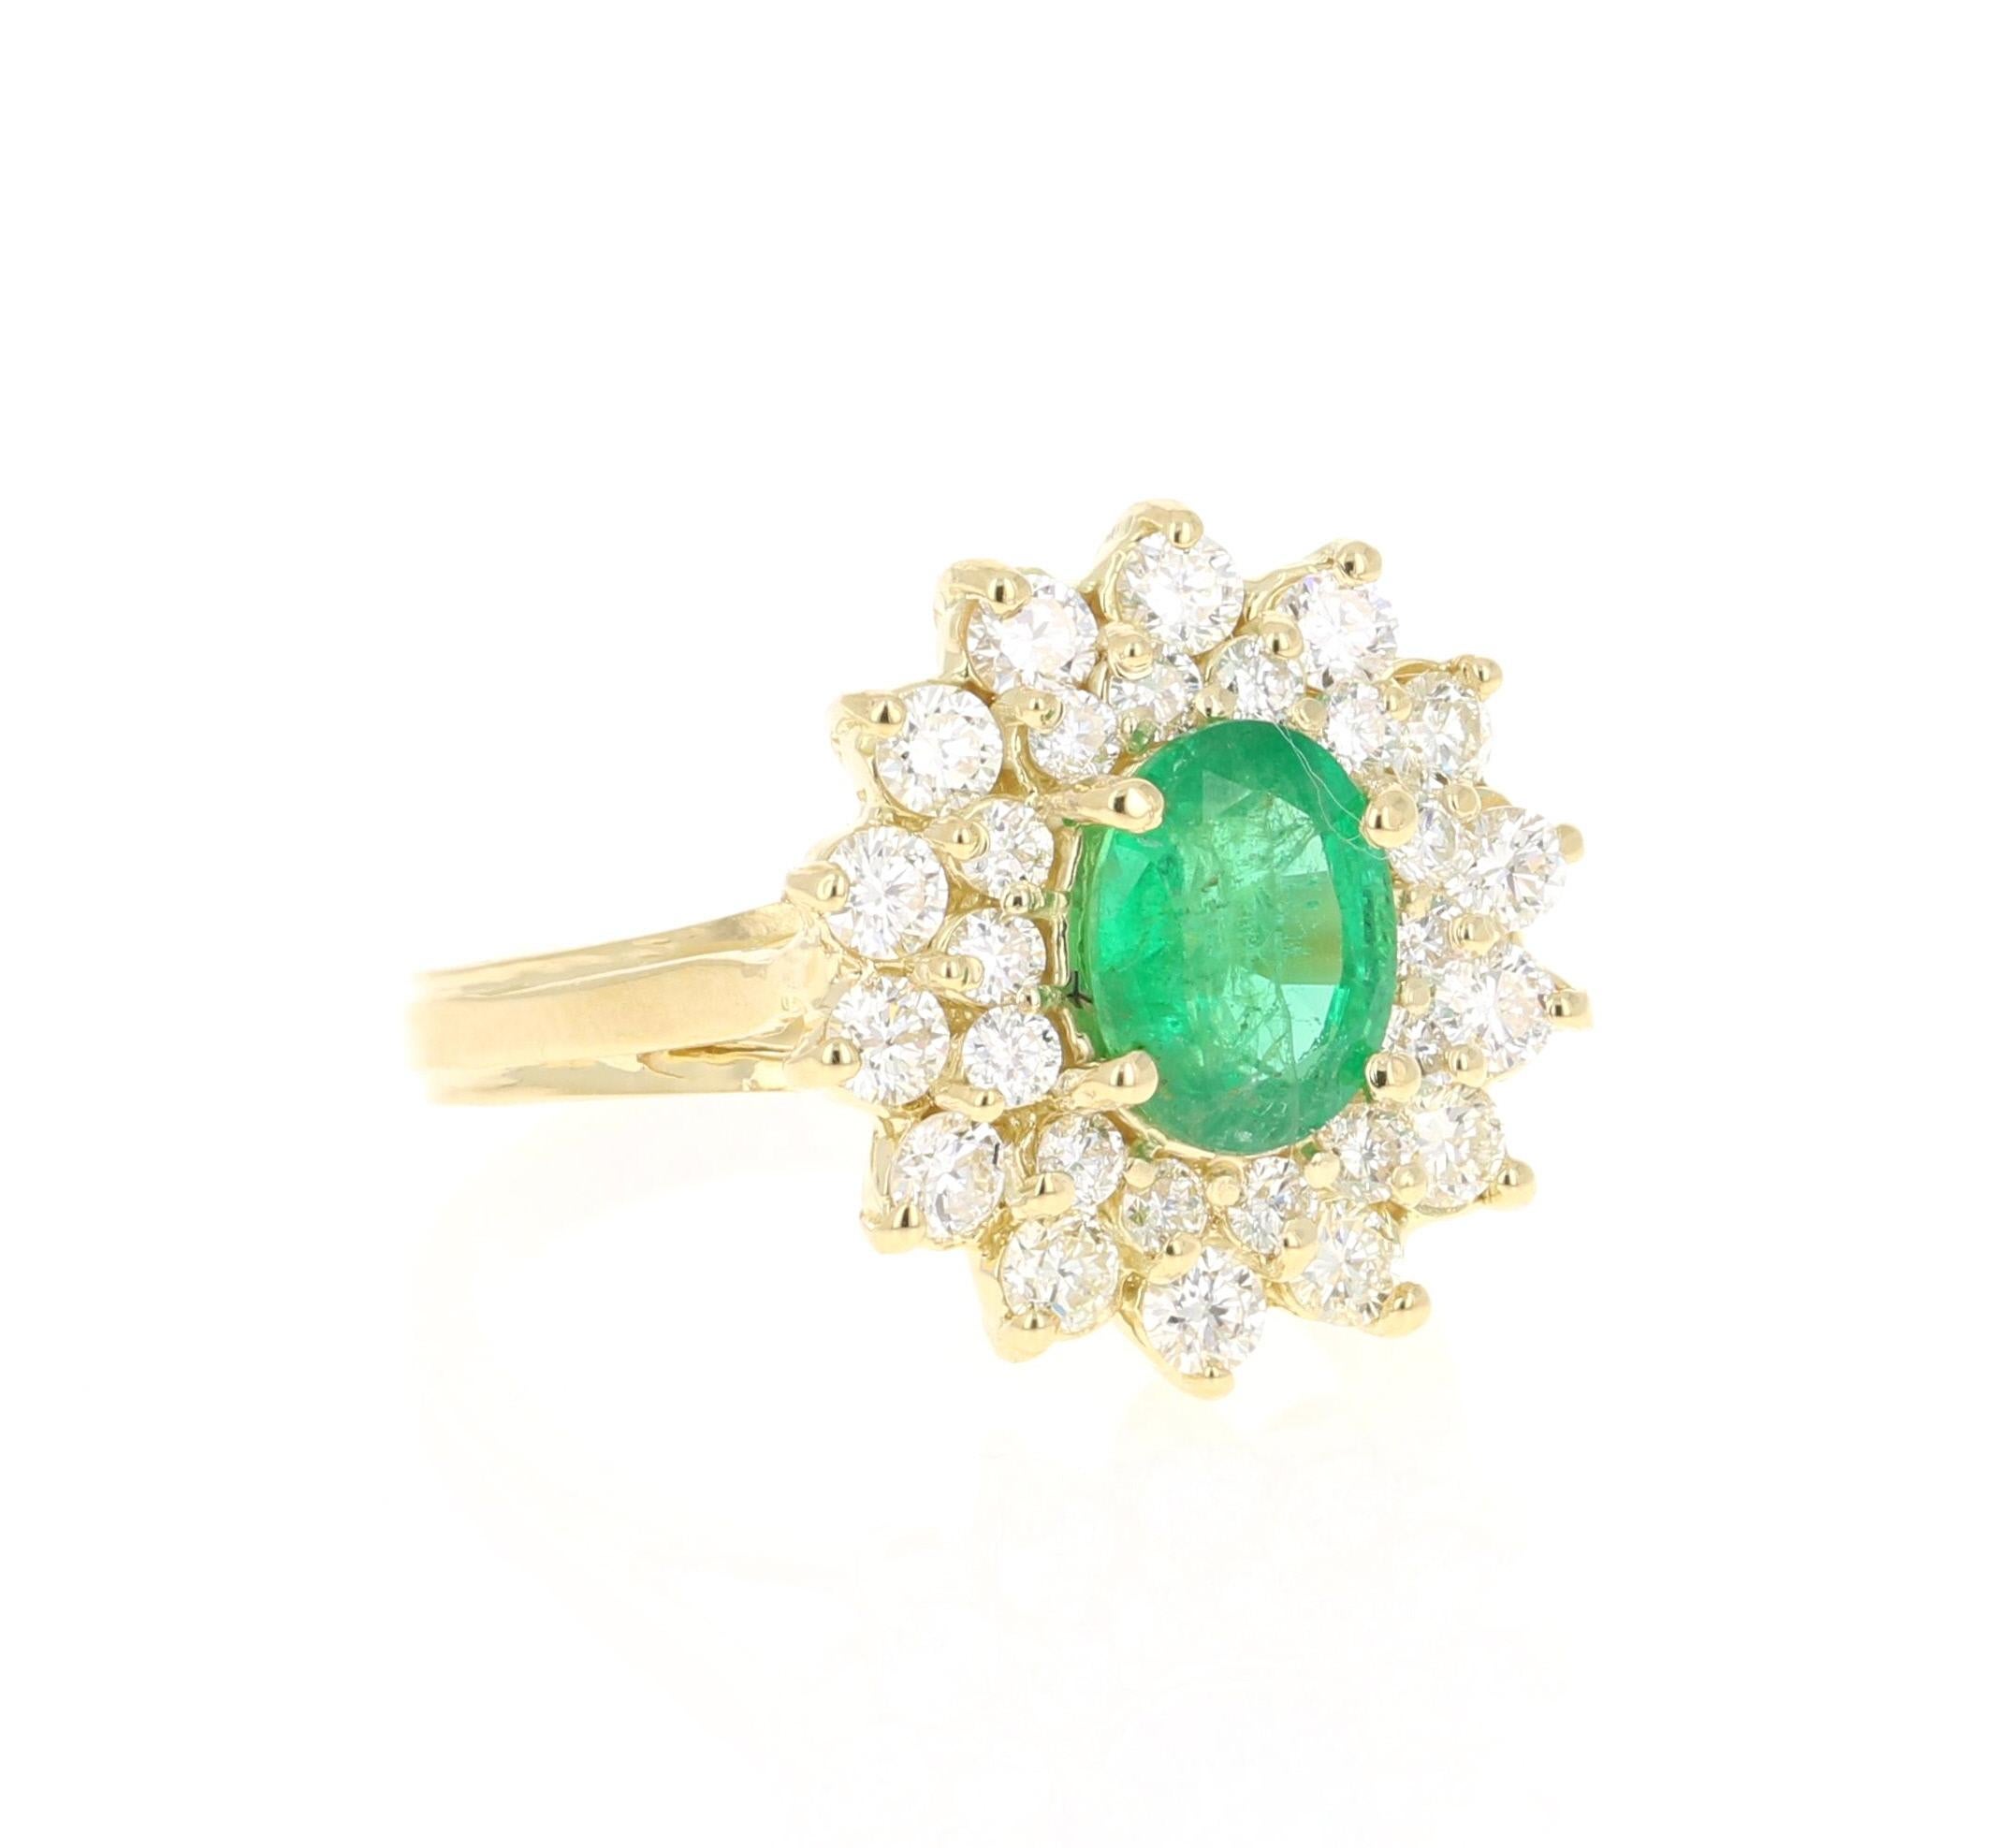 A beautiful 2.54 Carat Emerald and Diamond Ring in 18K Yellow Gold.
This gorgeous ring has a 1.39 Carat Oval Cut Emerald that is set in the center of the ring!  The Emerald is surrounded by 28 Round Cut Diamonds that weigh 1.15 carats. The Clarity